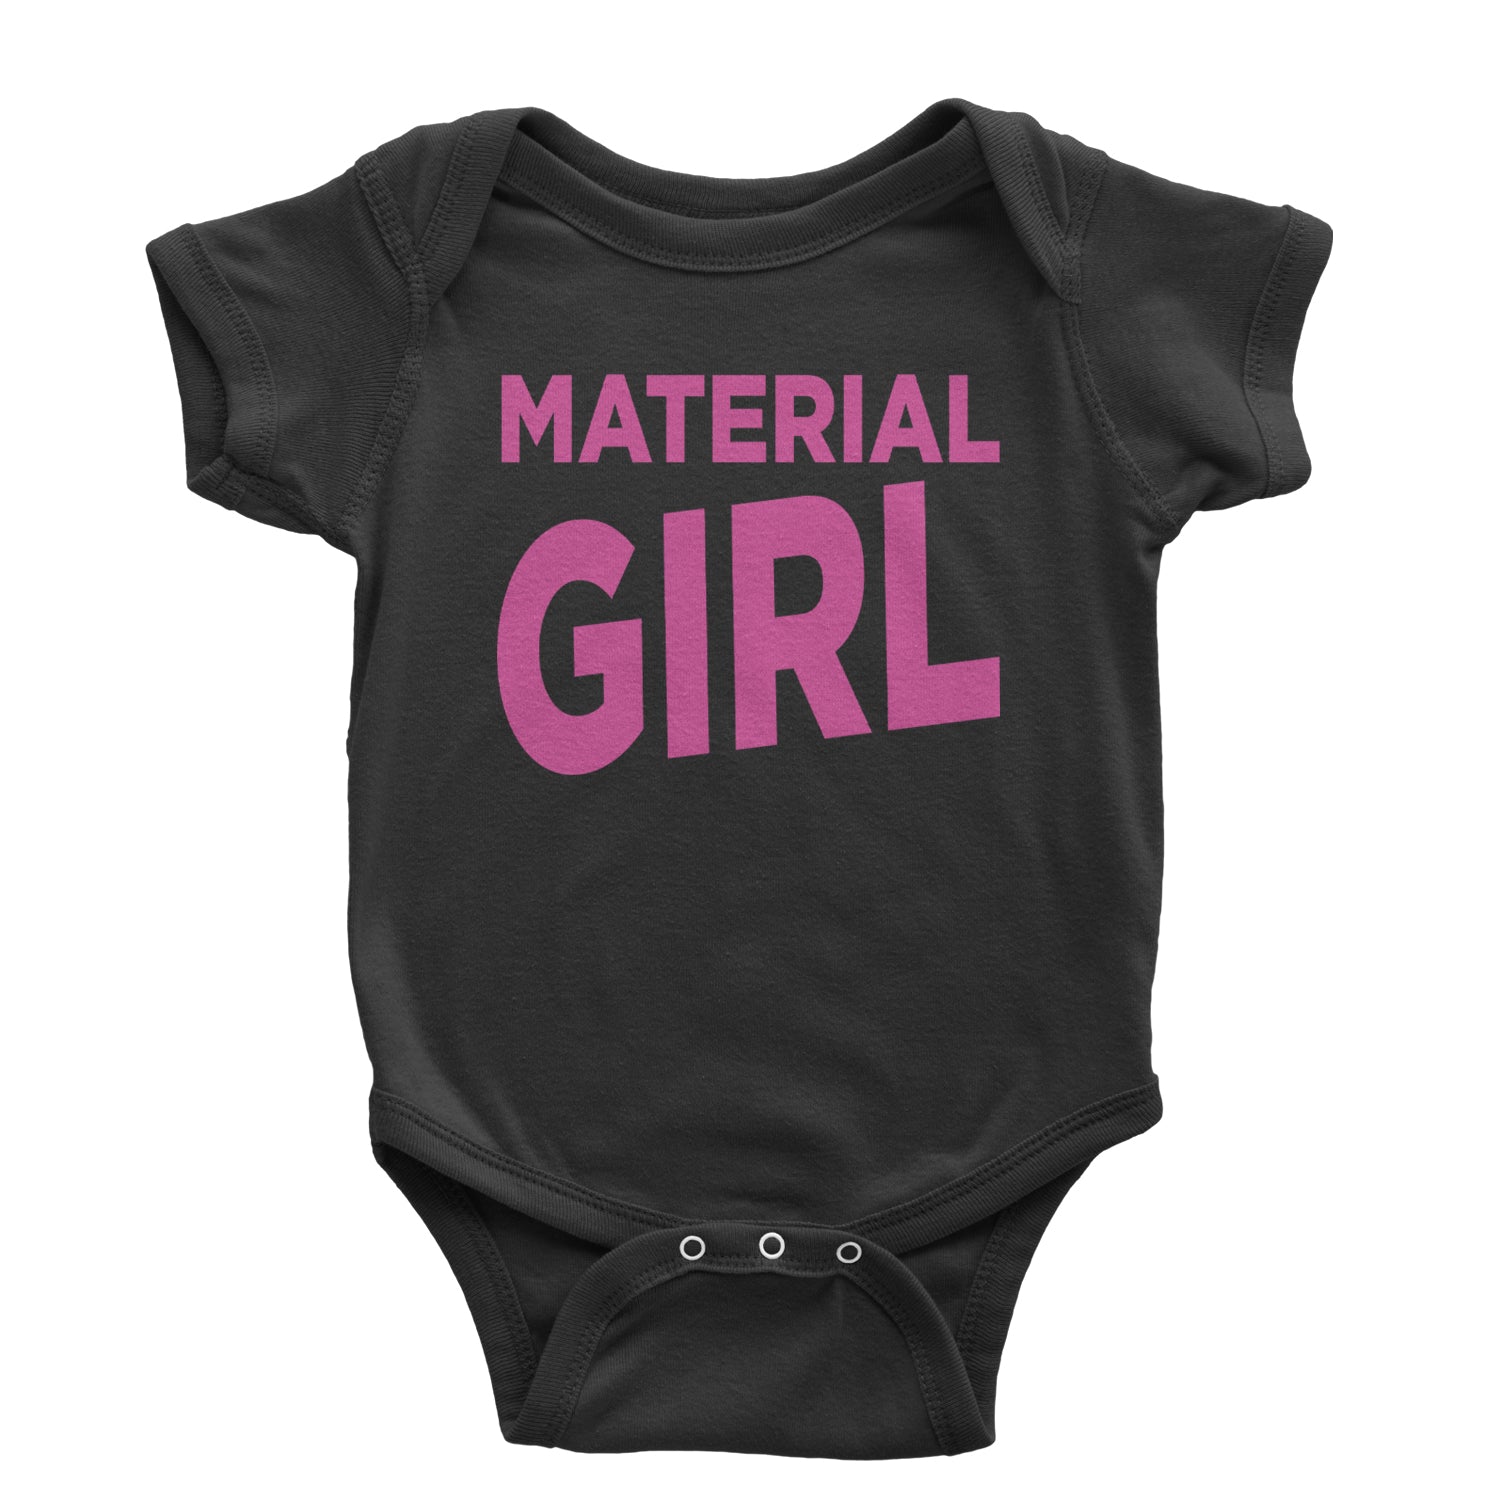 Material Girl 80's Retro Celebration Infant One-Piece Romper Bodysuit and Toddler T-shirt